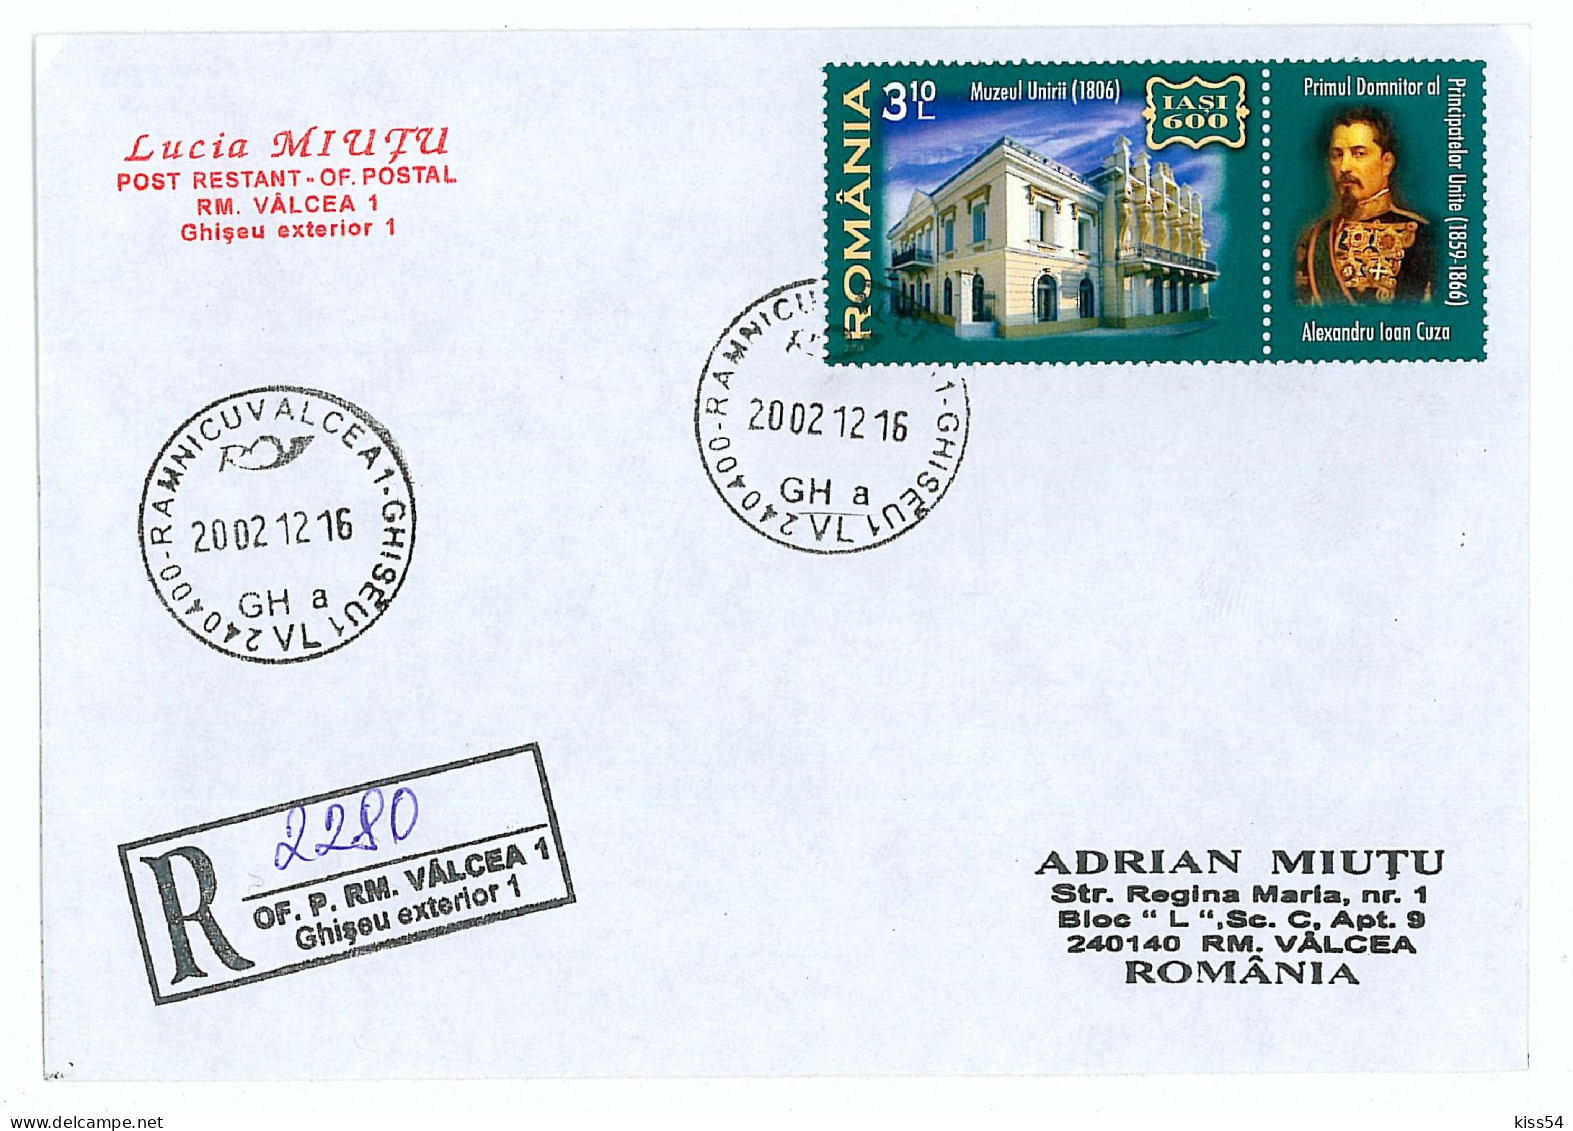 NCP 26 - 2280-a IASI, Museum, Romania - Registered, Stamp With Vignette - 2012 - Covers & Documents